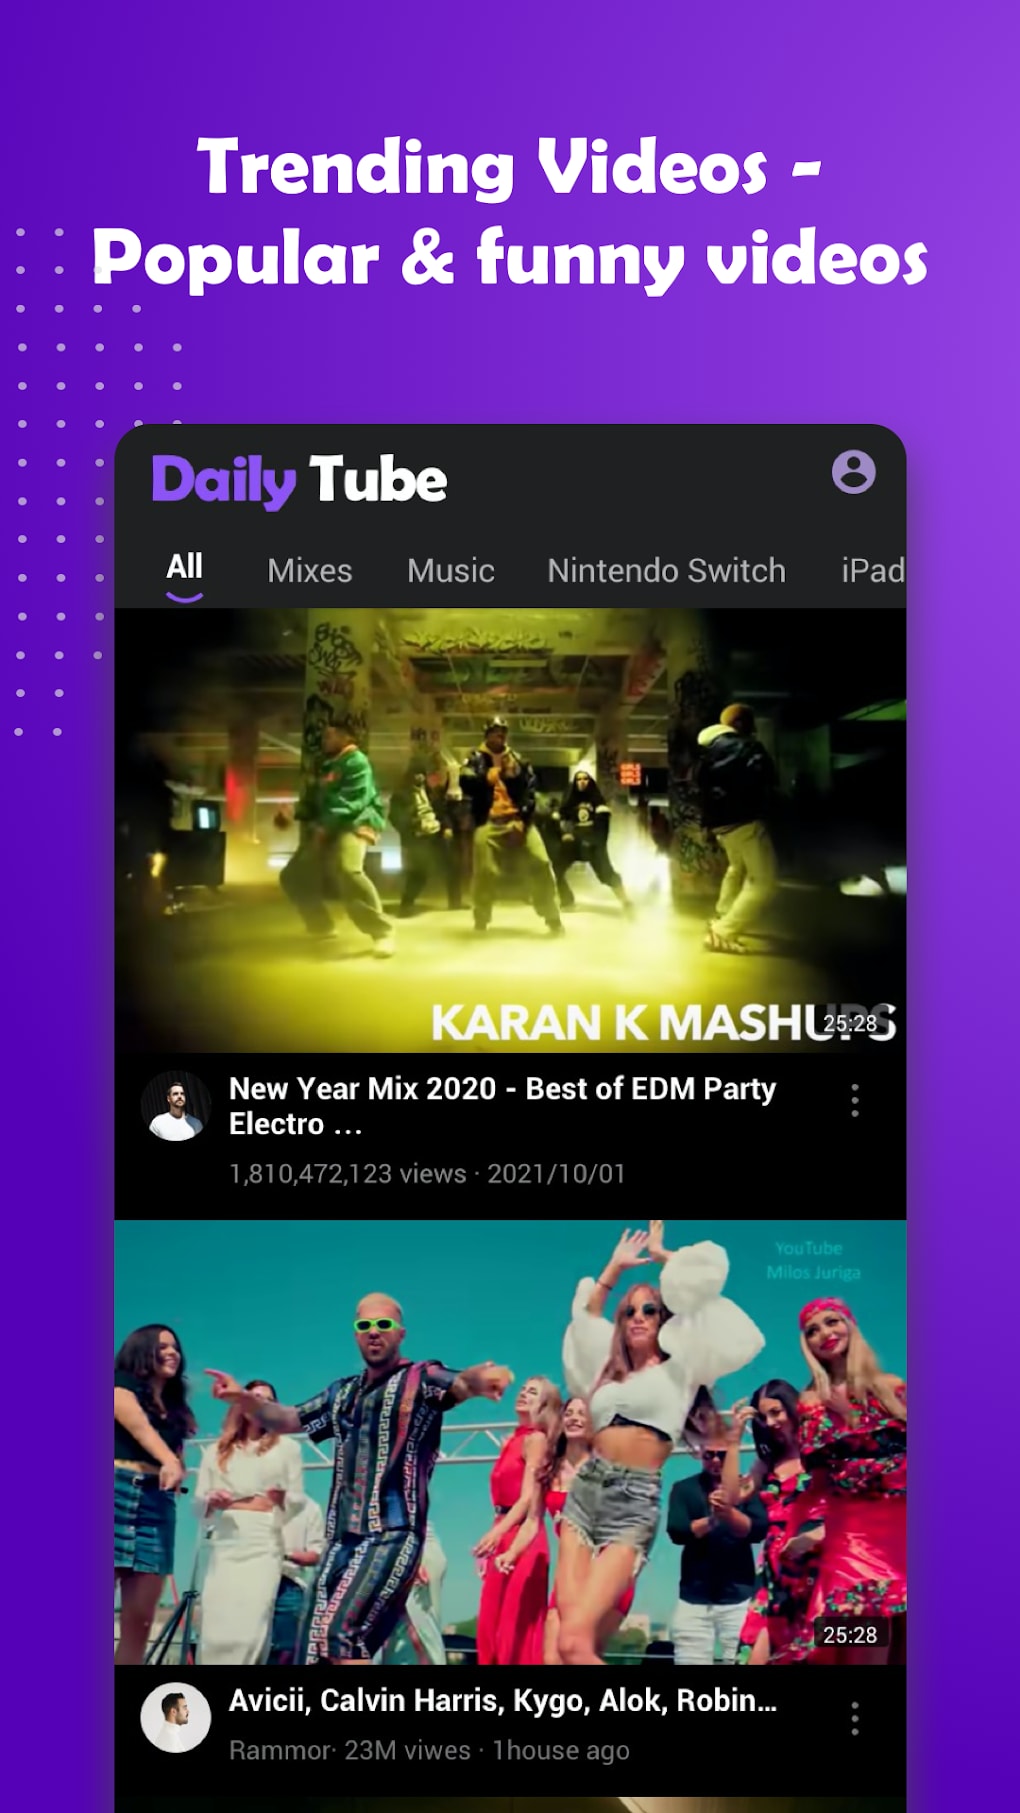 Daily Tube-Block Ads Tube APK - Free download for Android